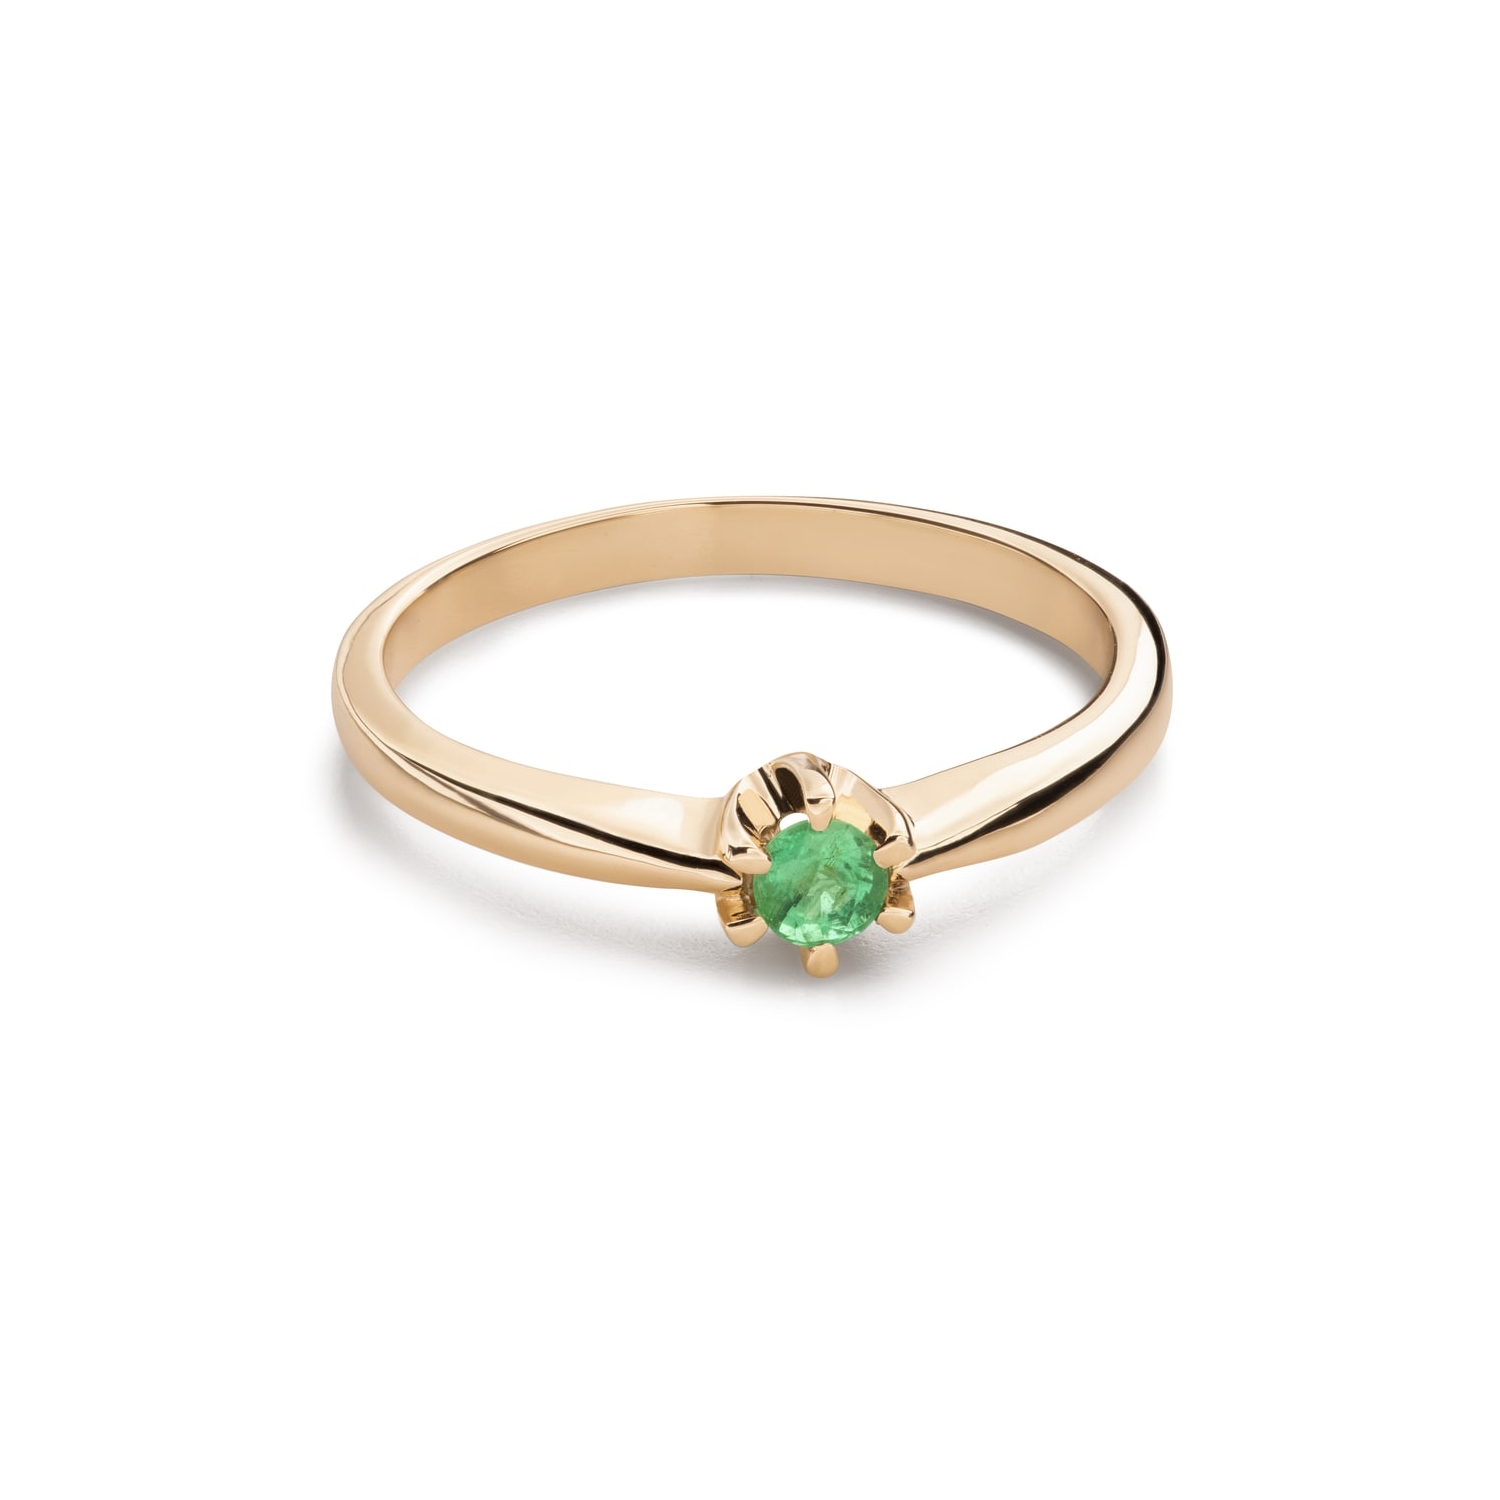 Engagement ring with gemstones "Emerald 58"